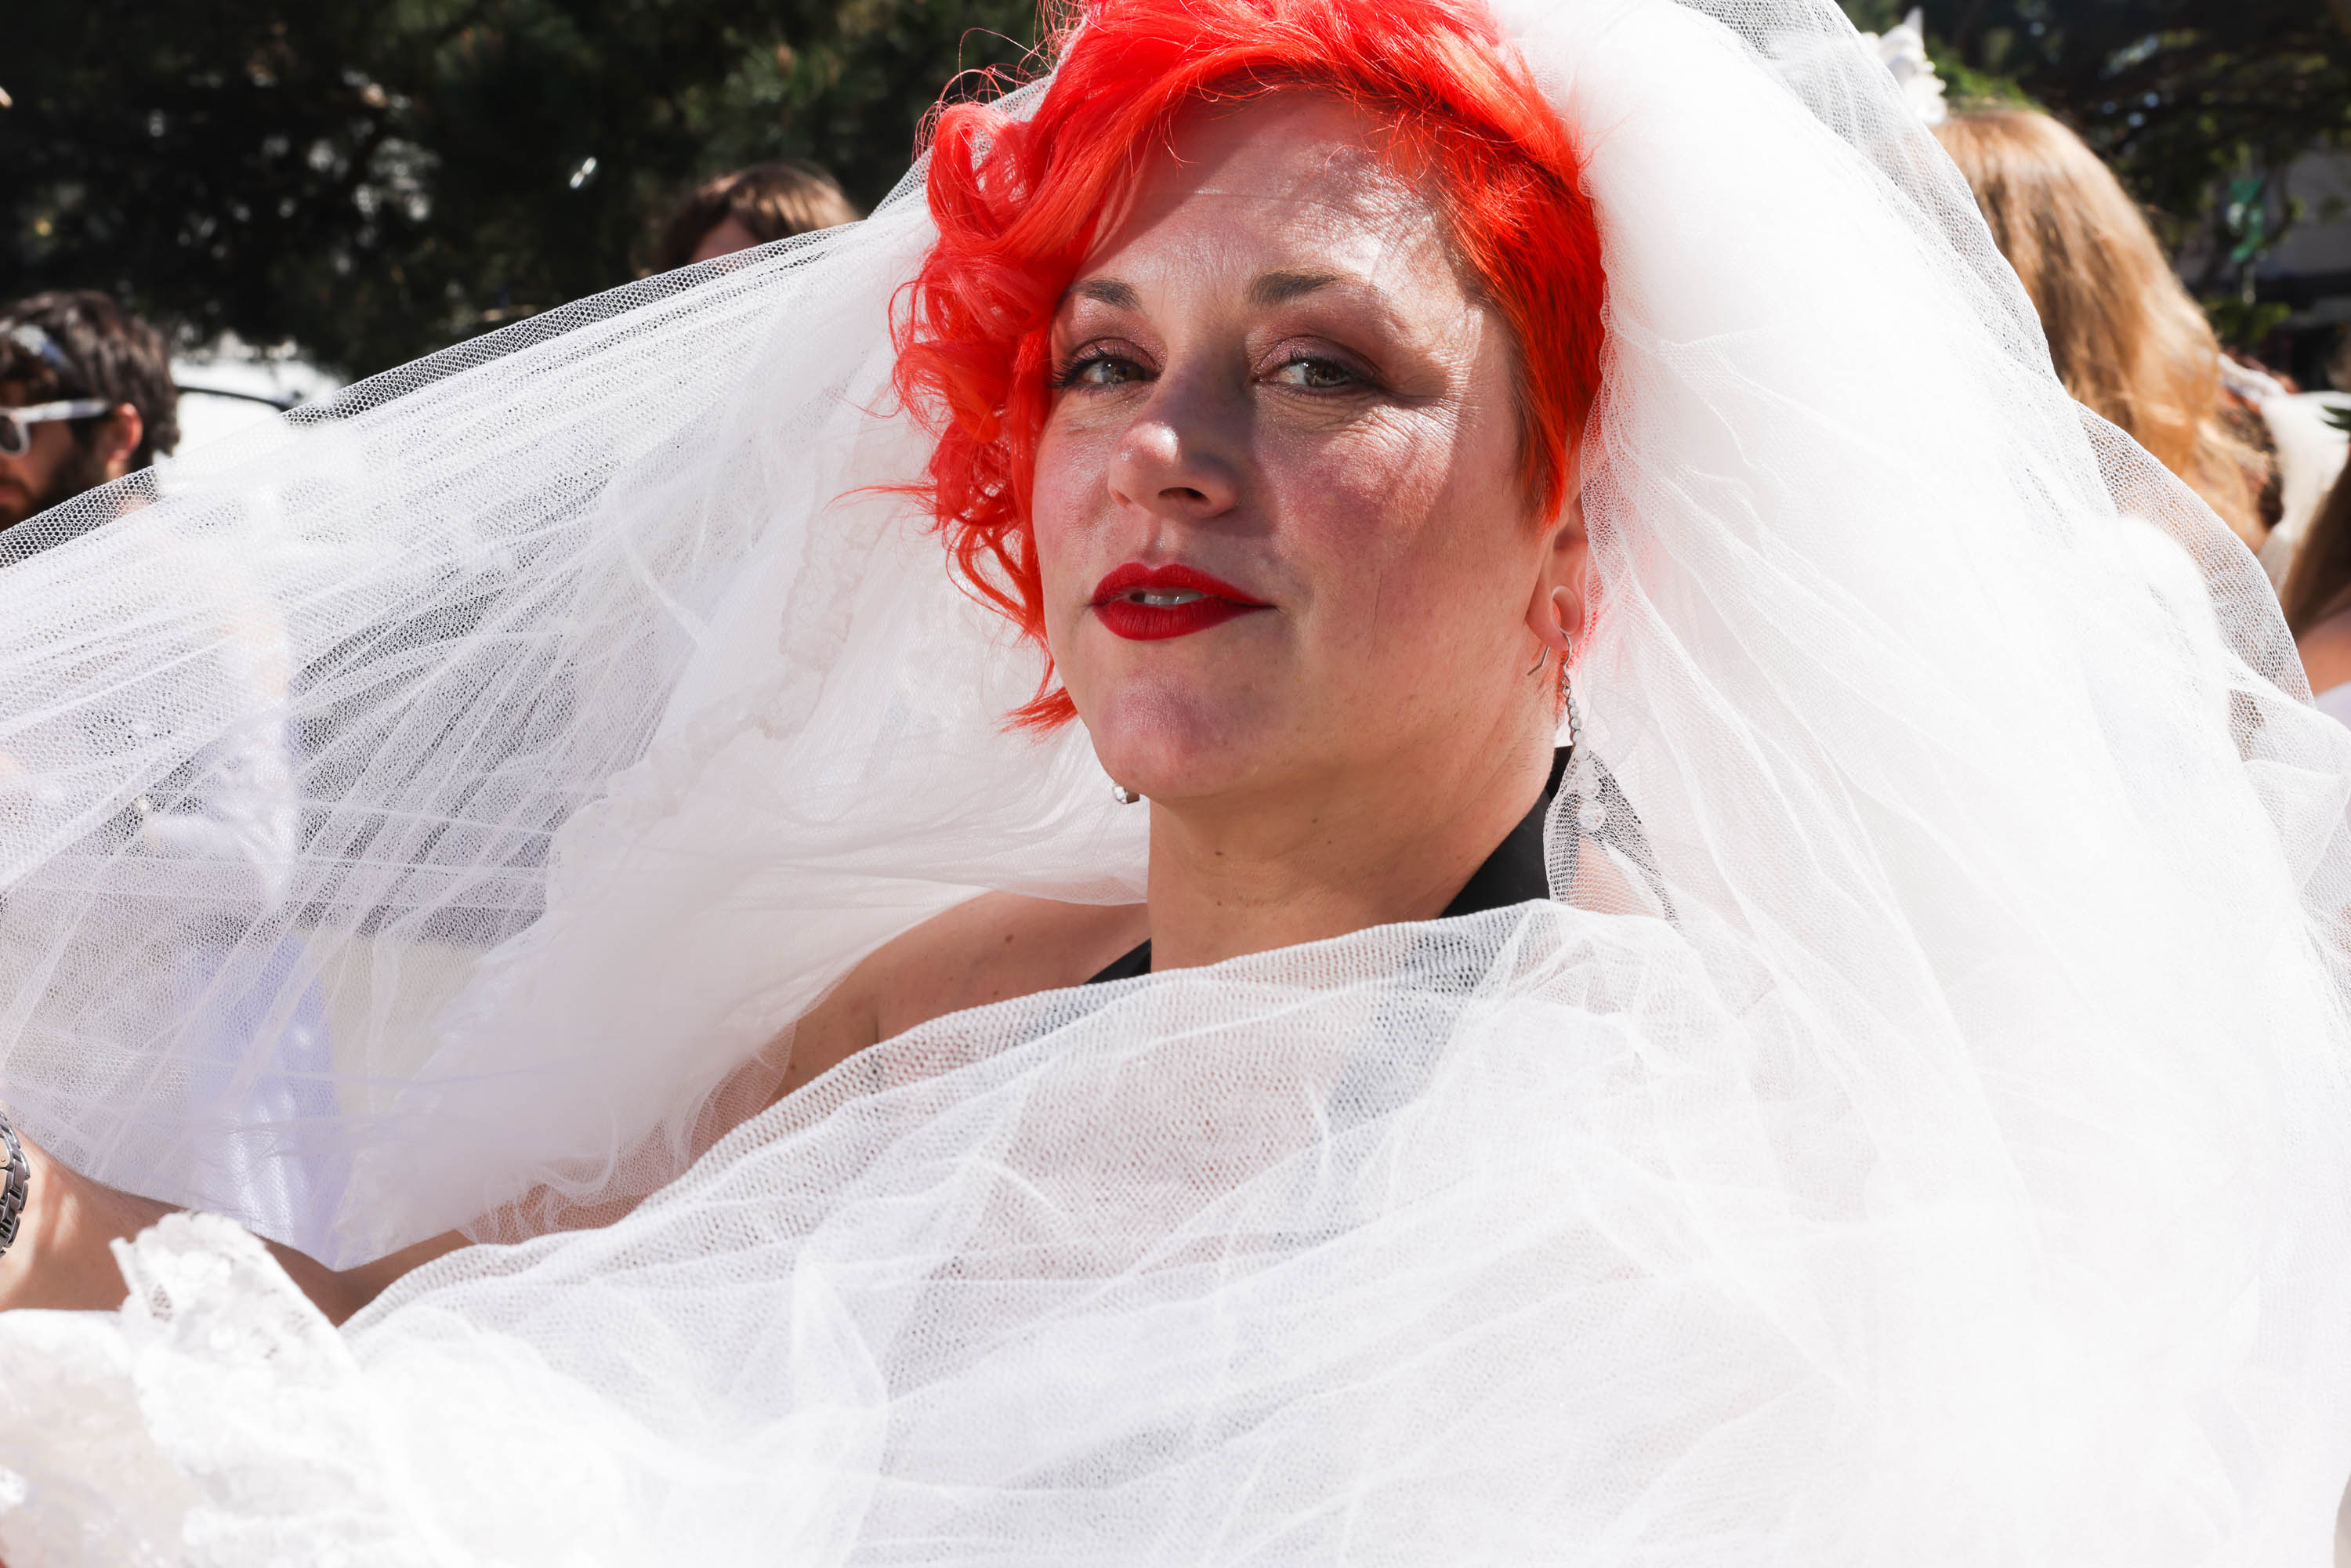 A woman with vibrant red hair is wrapped in tulle veil and wears bright red lipstick and an introspective look.